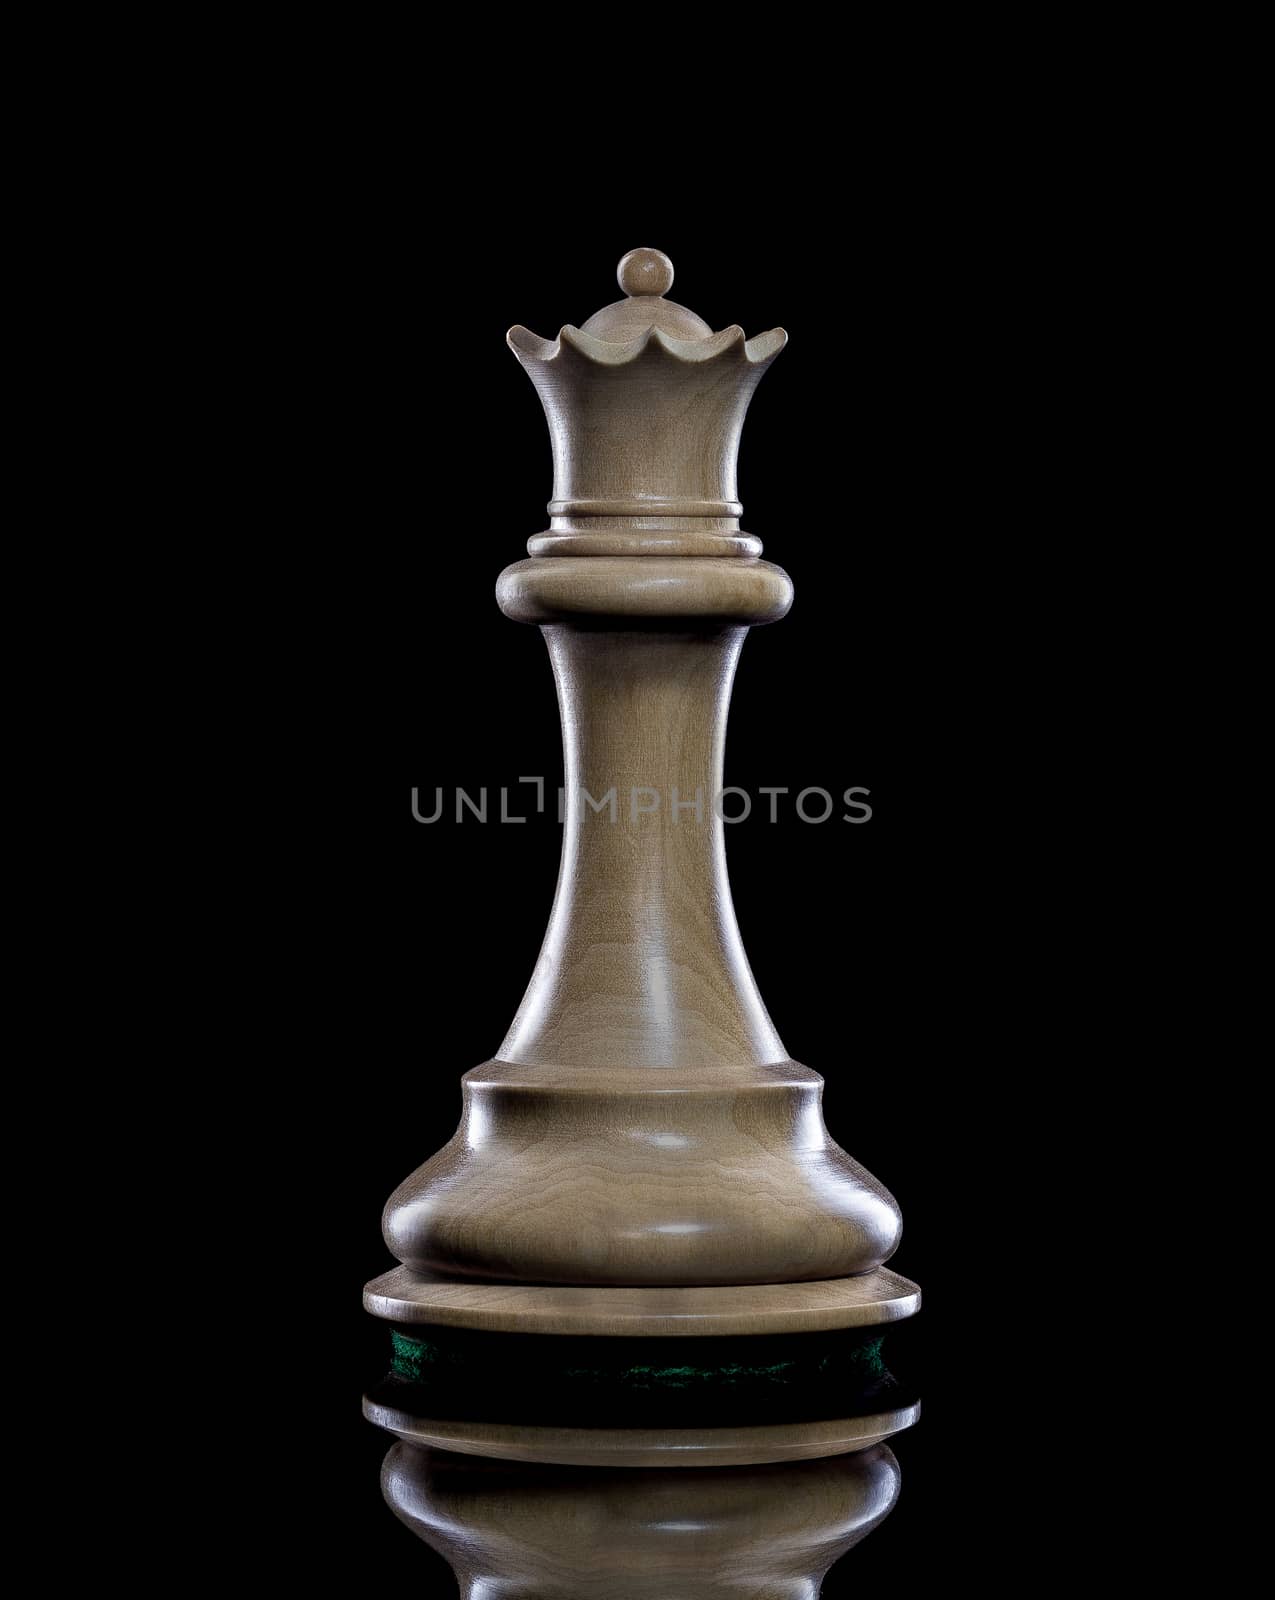 Black and White Queen of chess setup on dark background . Leader and teamwork concept for success. Chess concept save the Queen and save the strategy.